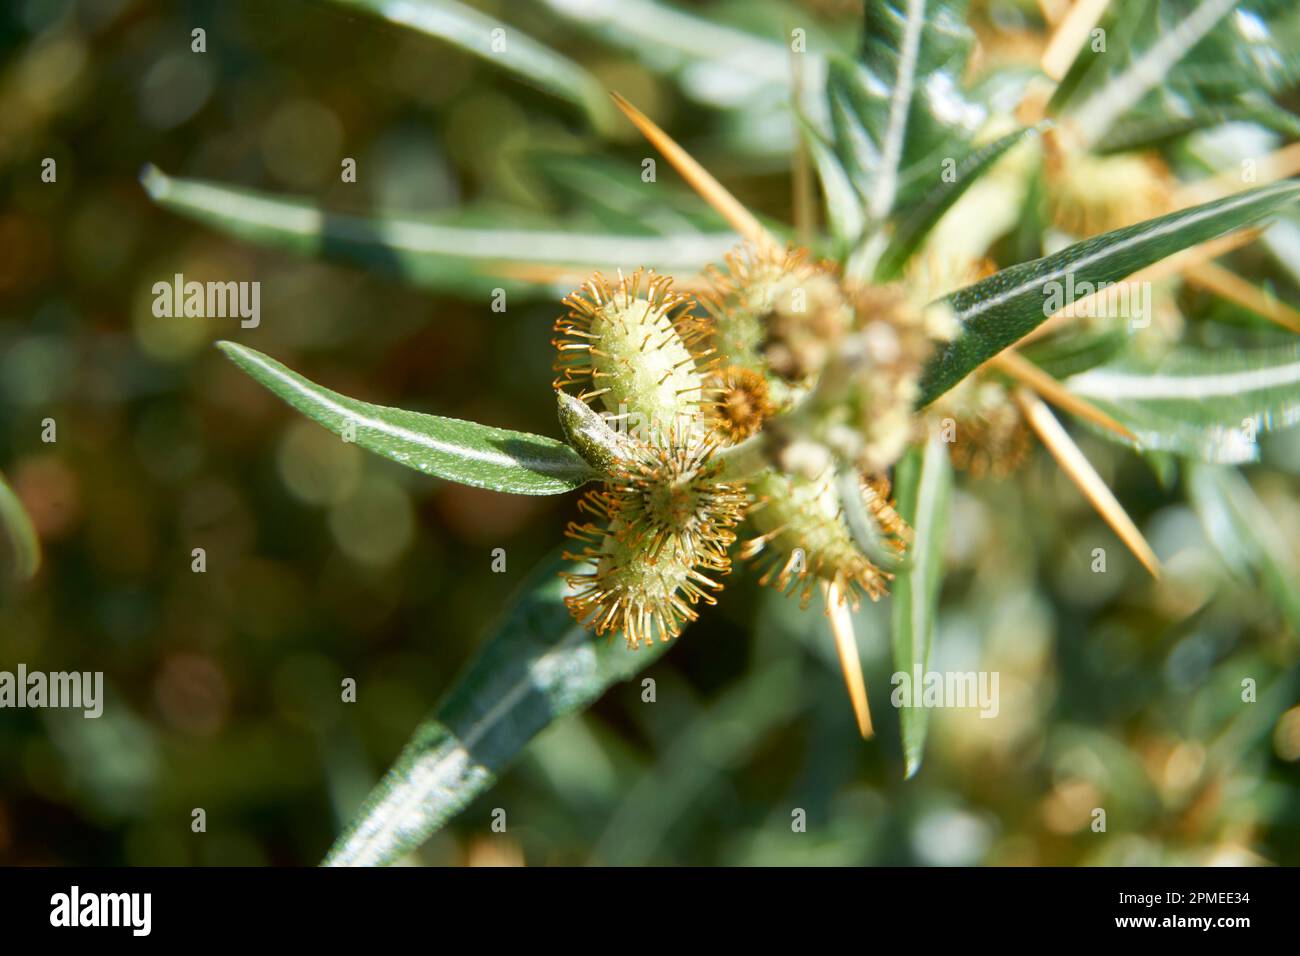 Macro images of Bathurst Burr or Xanthium spinosum an introduced invasive weed pest. Stock Photo